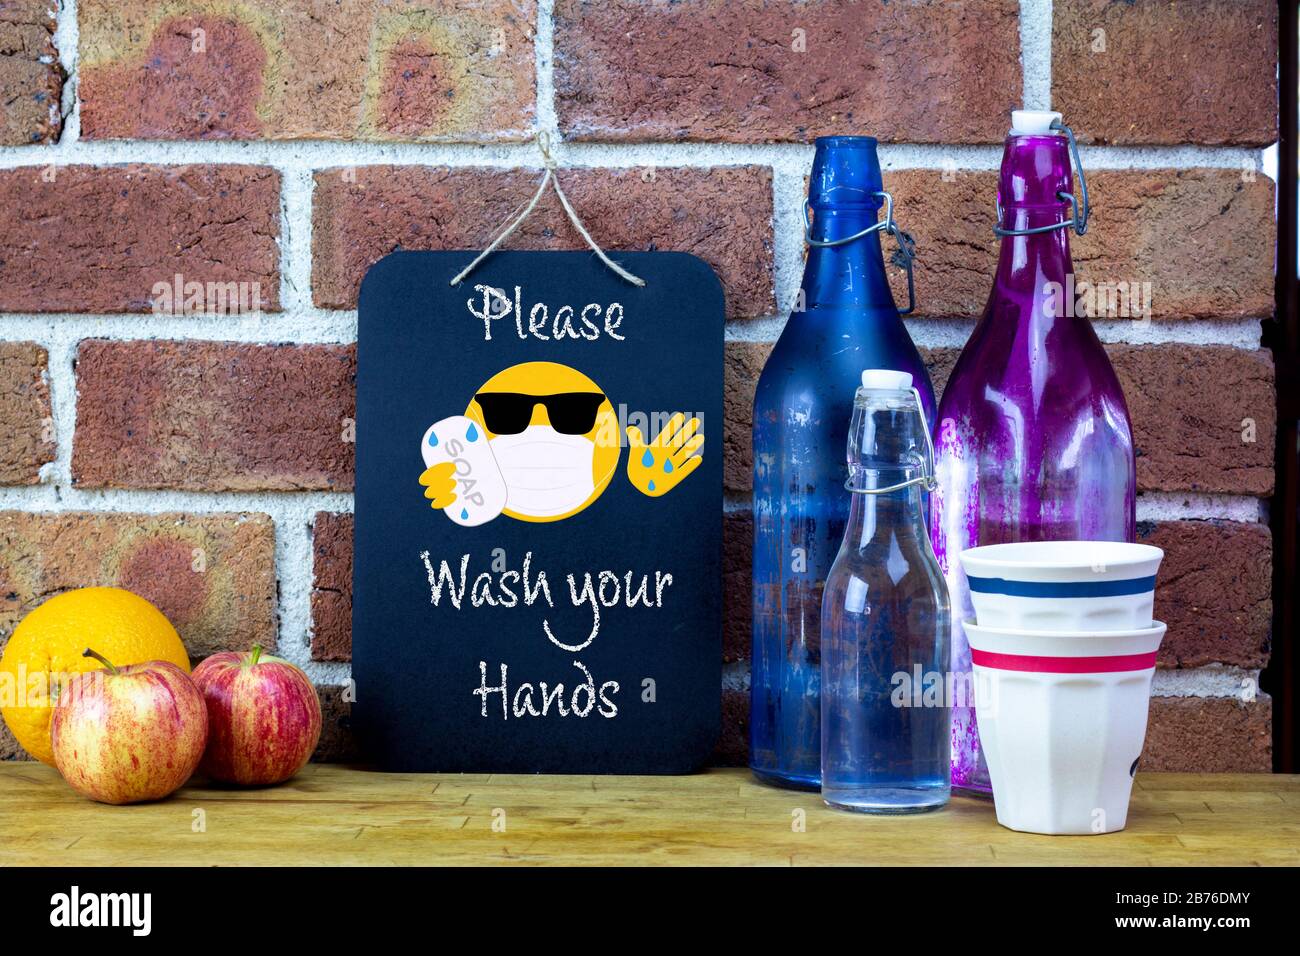 Cafe sign, please wash your hands with emoji  sticker washing hands with soap, coronavirus covid19 prevention Stock Photo